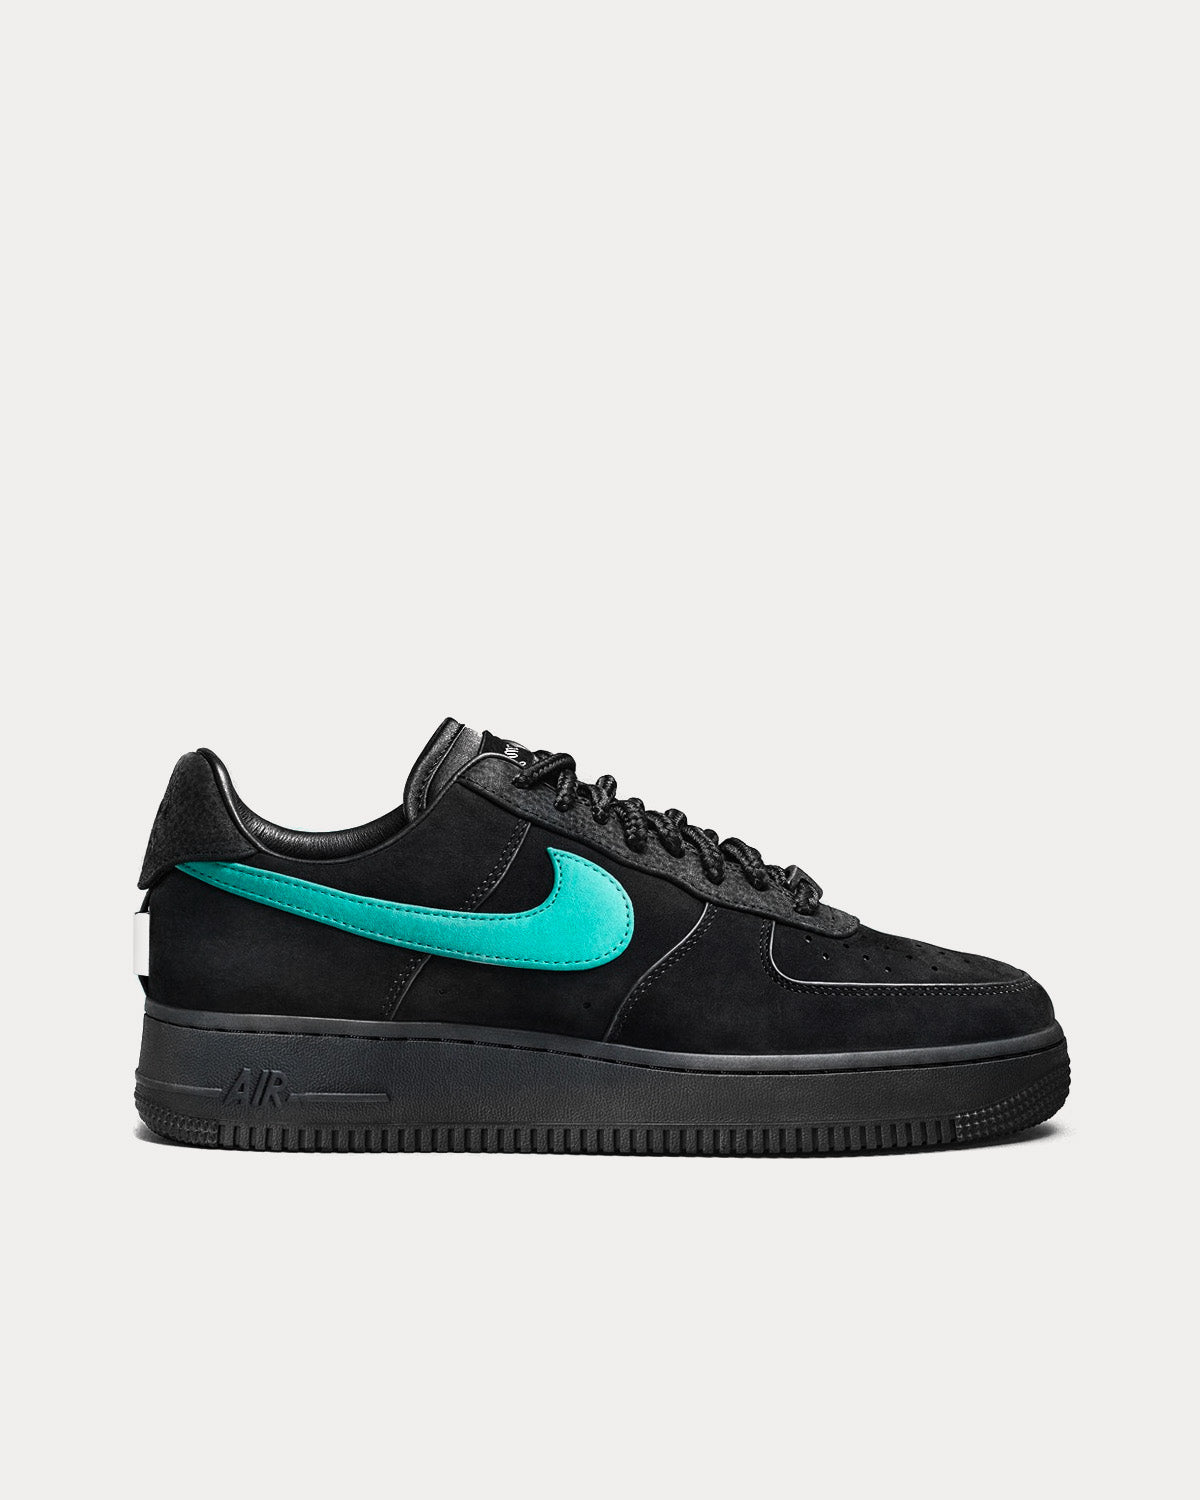 Nike x Tiffany & Co. - Air Force 1 '1837' Black / Tiffany Blue Low Top Sneakers